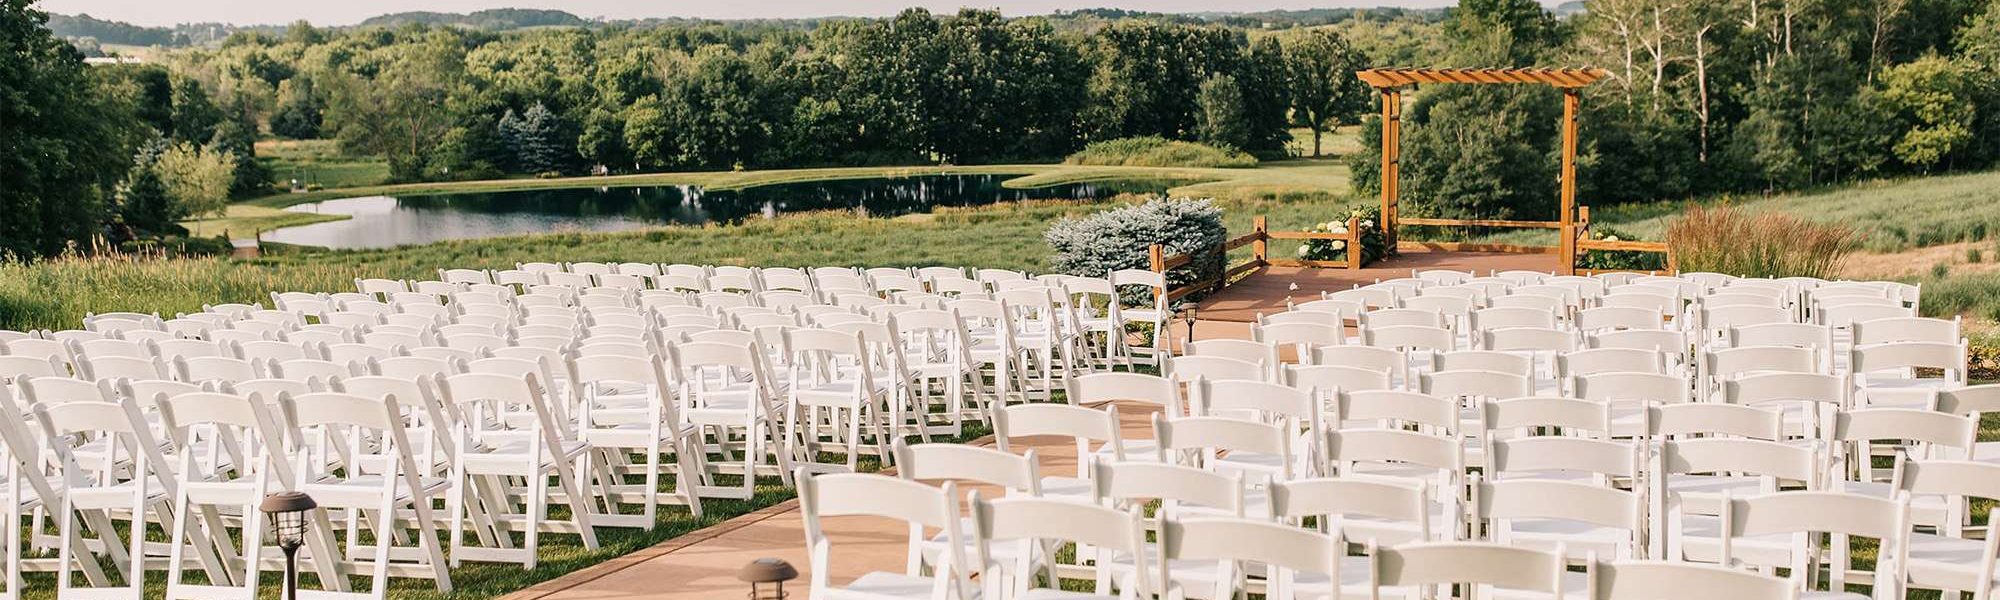 Outdoor wedding ceremony area at Milford Hills in Johnson Creek, WI